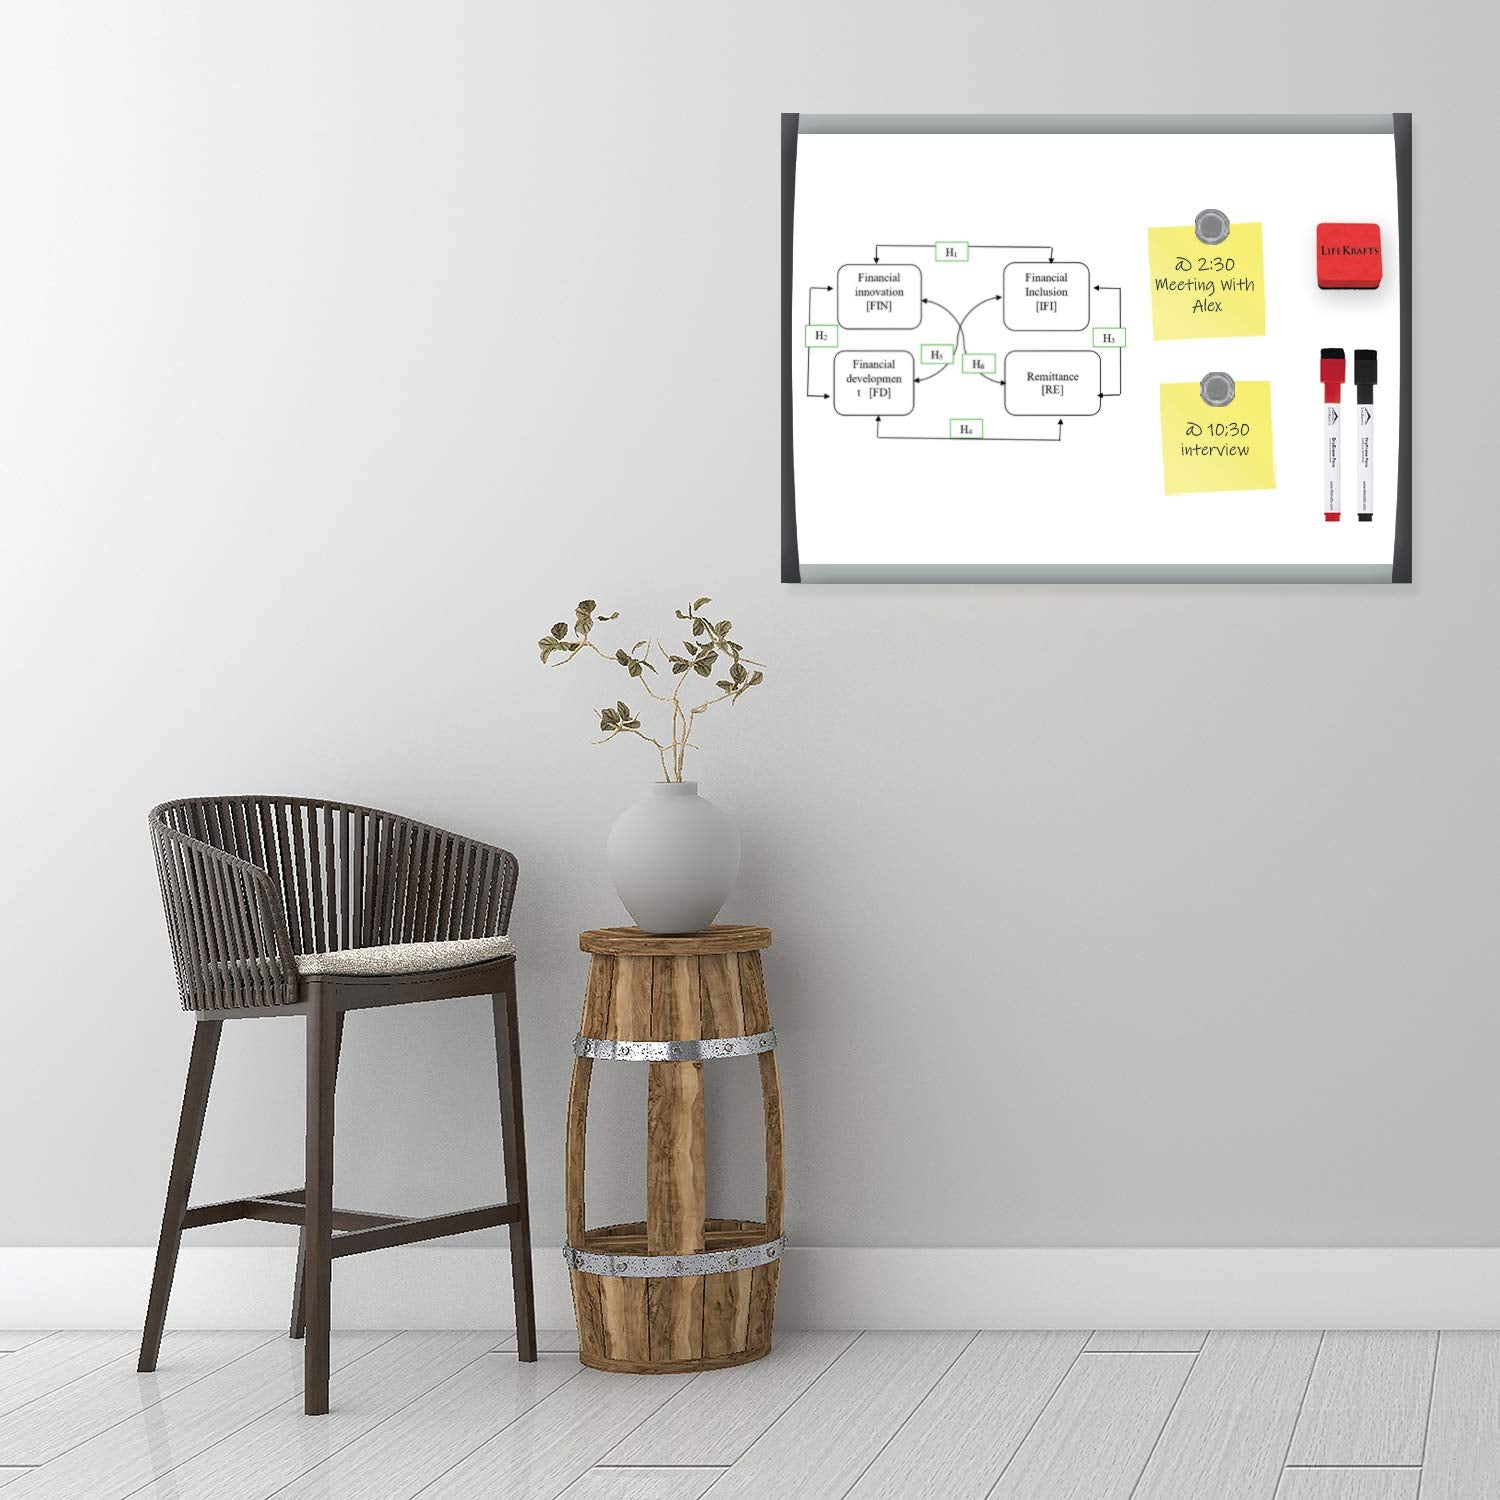 Dry Erase Magnetic White Board | Size: (23 x 17) inches - Pack of 1 LifeKrafts